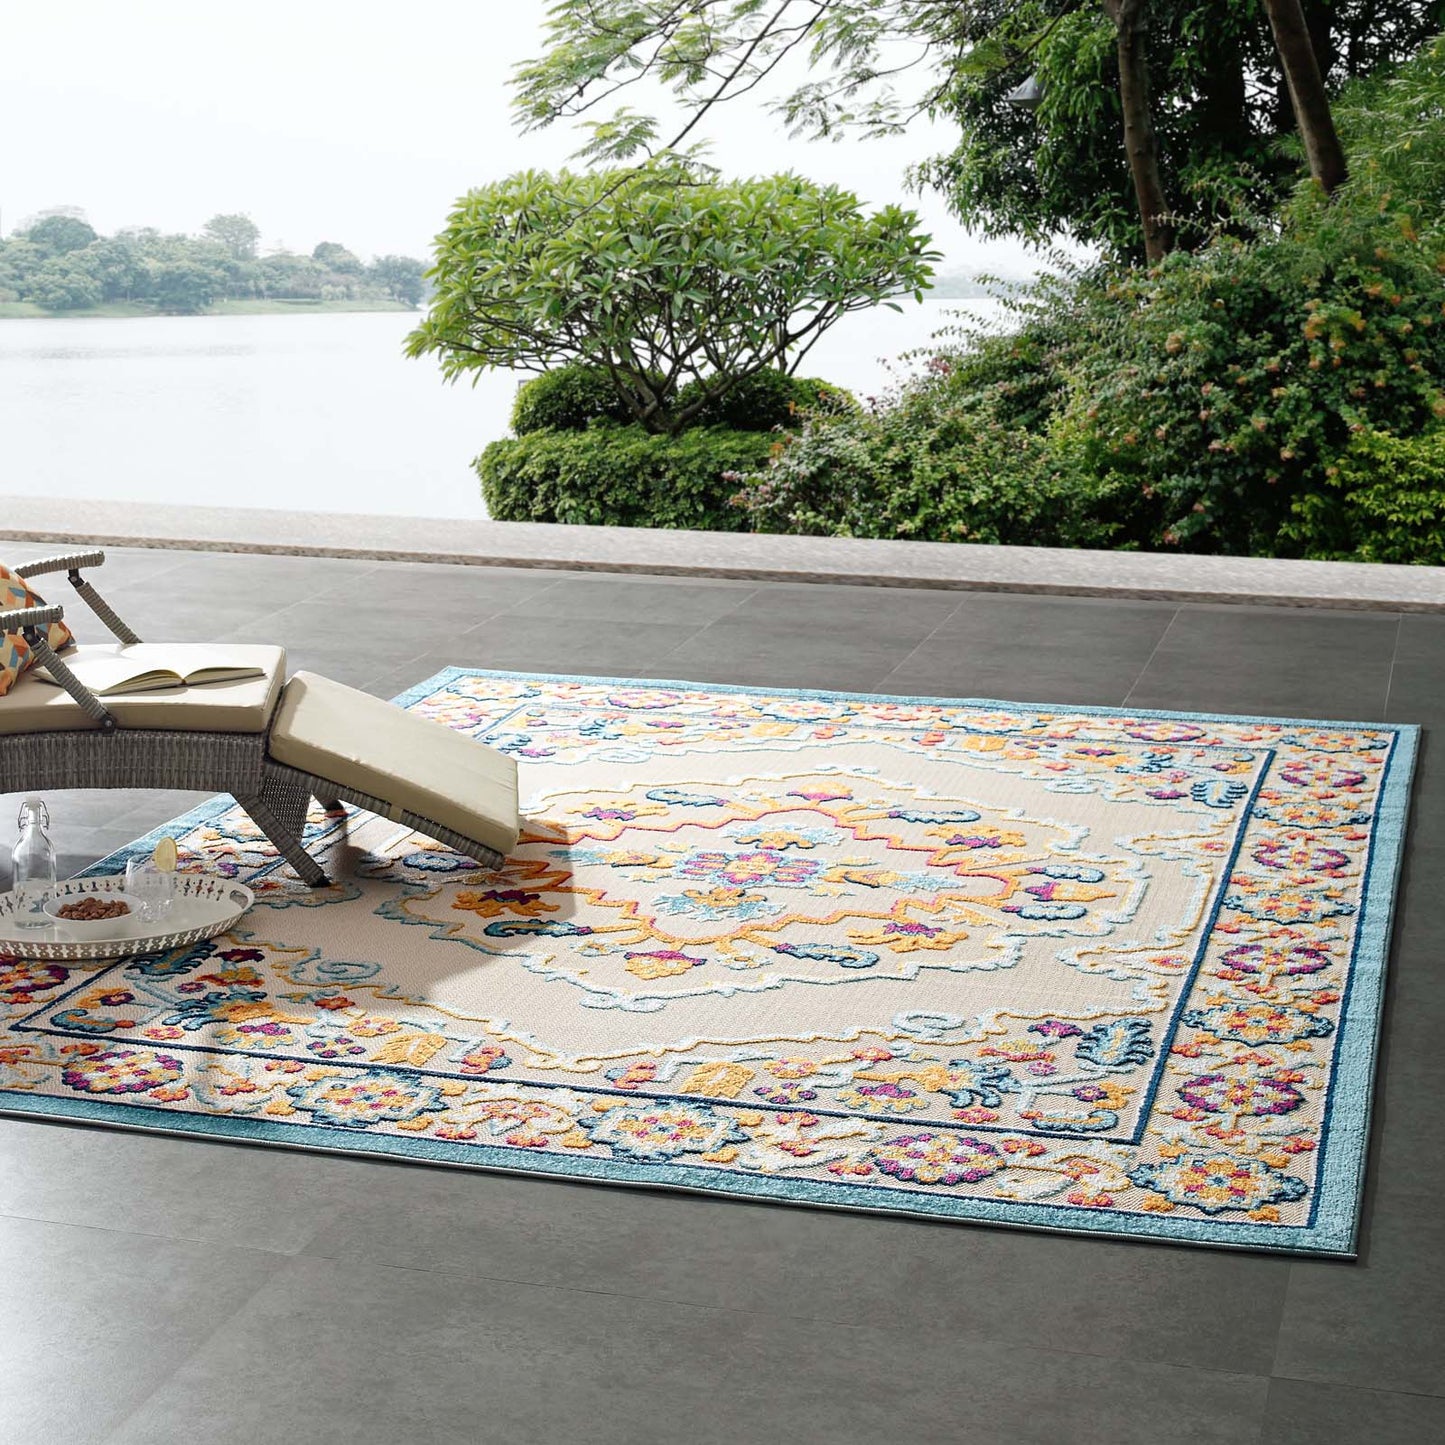 Reflect Ansel Distressed Floral Persian Medallion 8x10 Indoor and Outdoor Area Rug Multicolored R-1183A-810